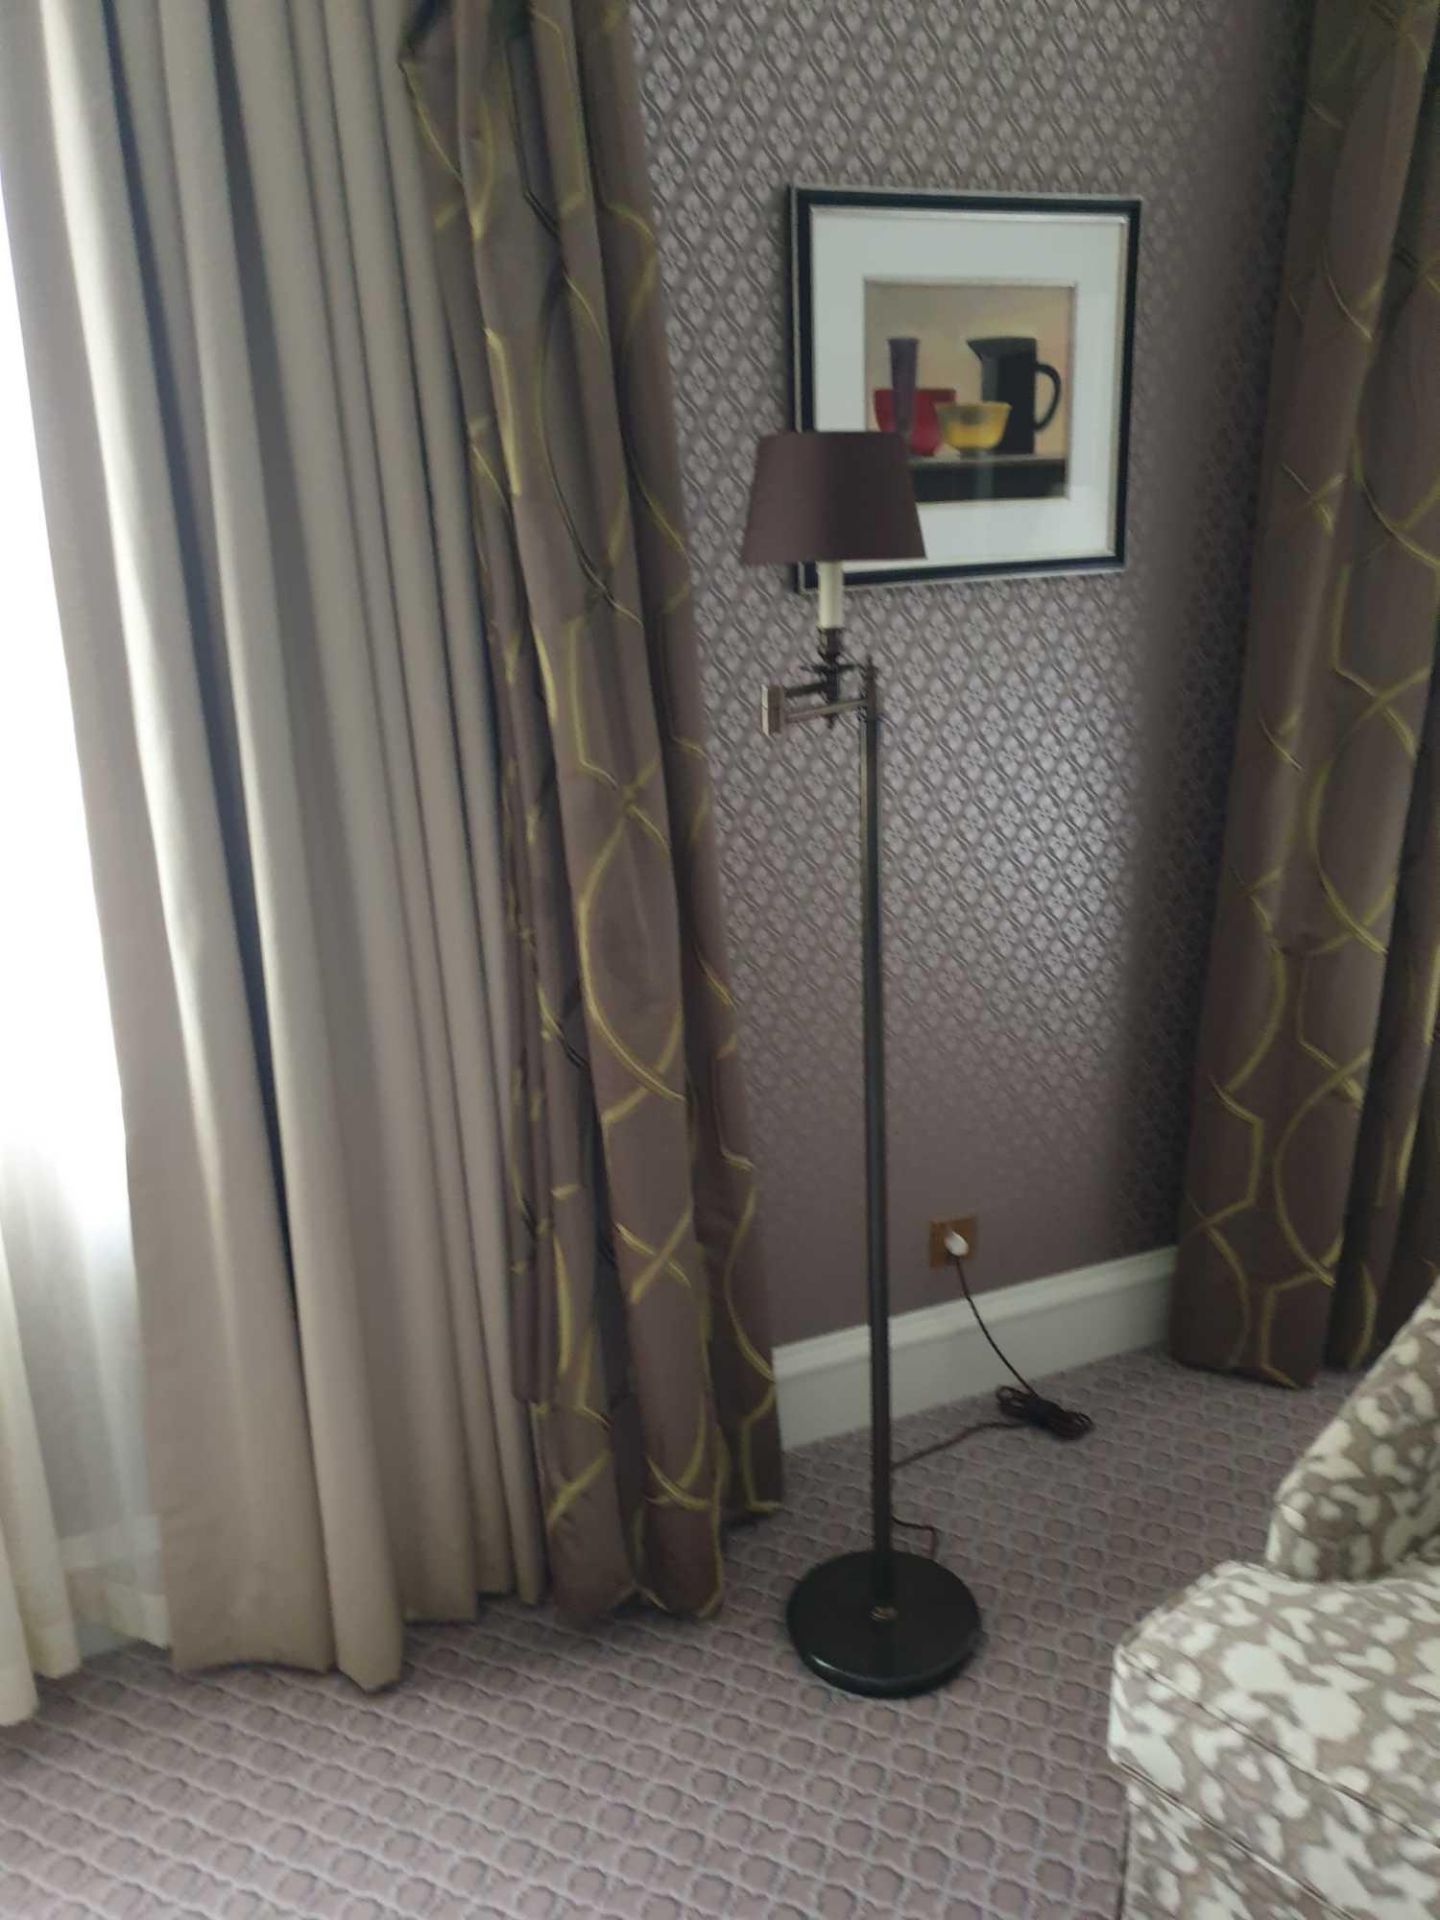 Library Floor Lamp Finished In English Bronze Swing Arm Function With Shade 156cm (Room 829)